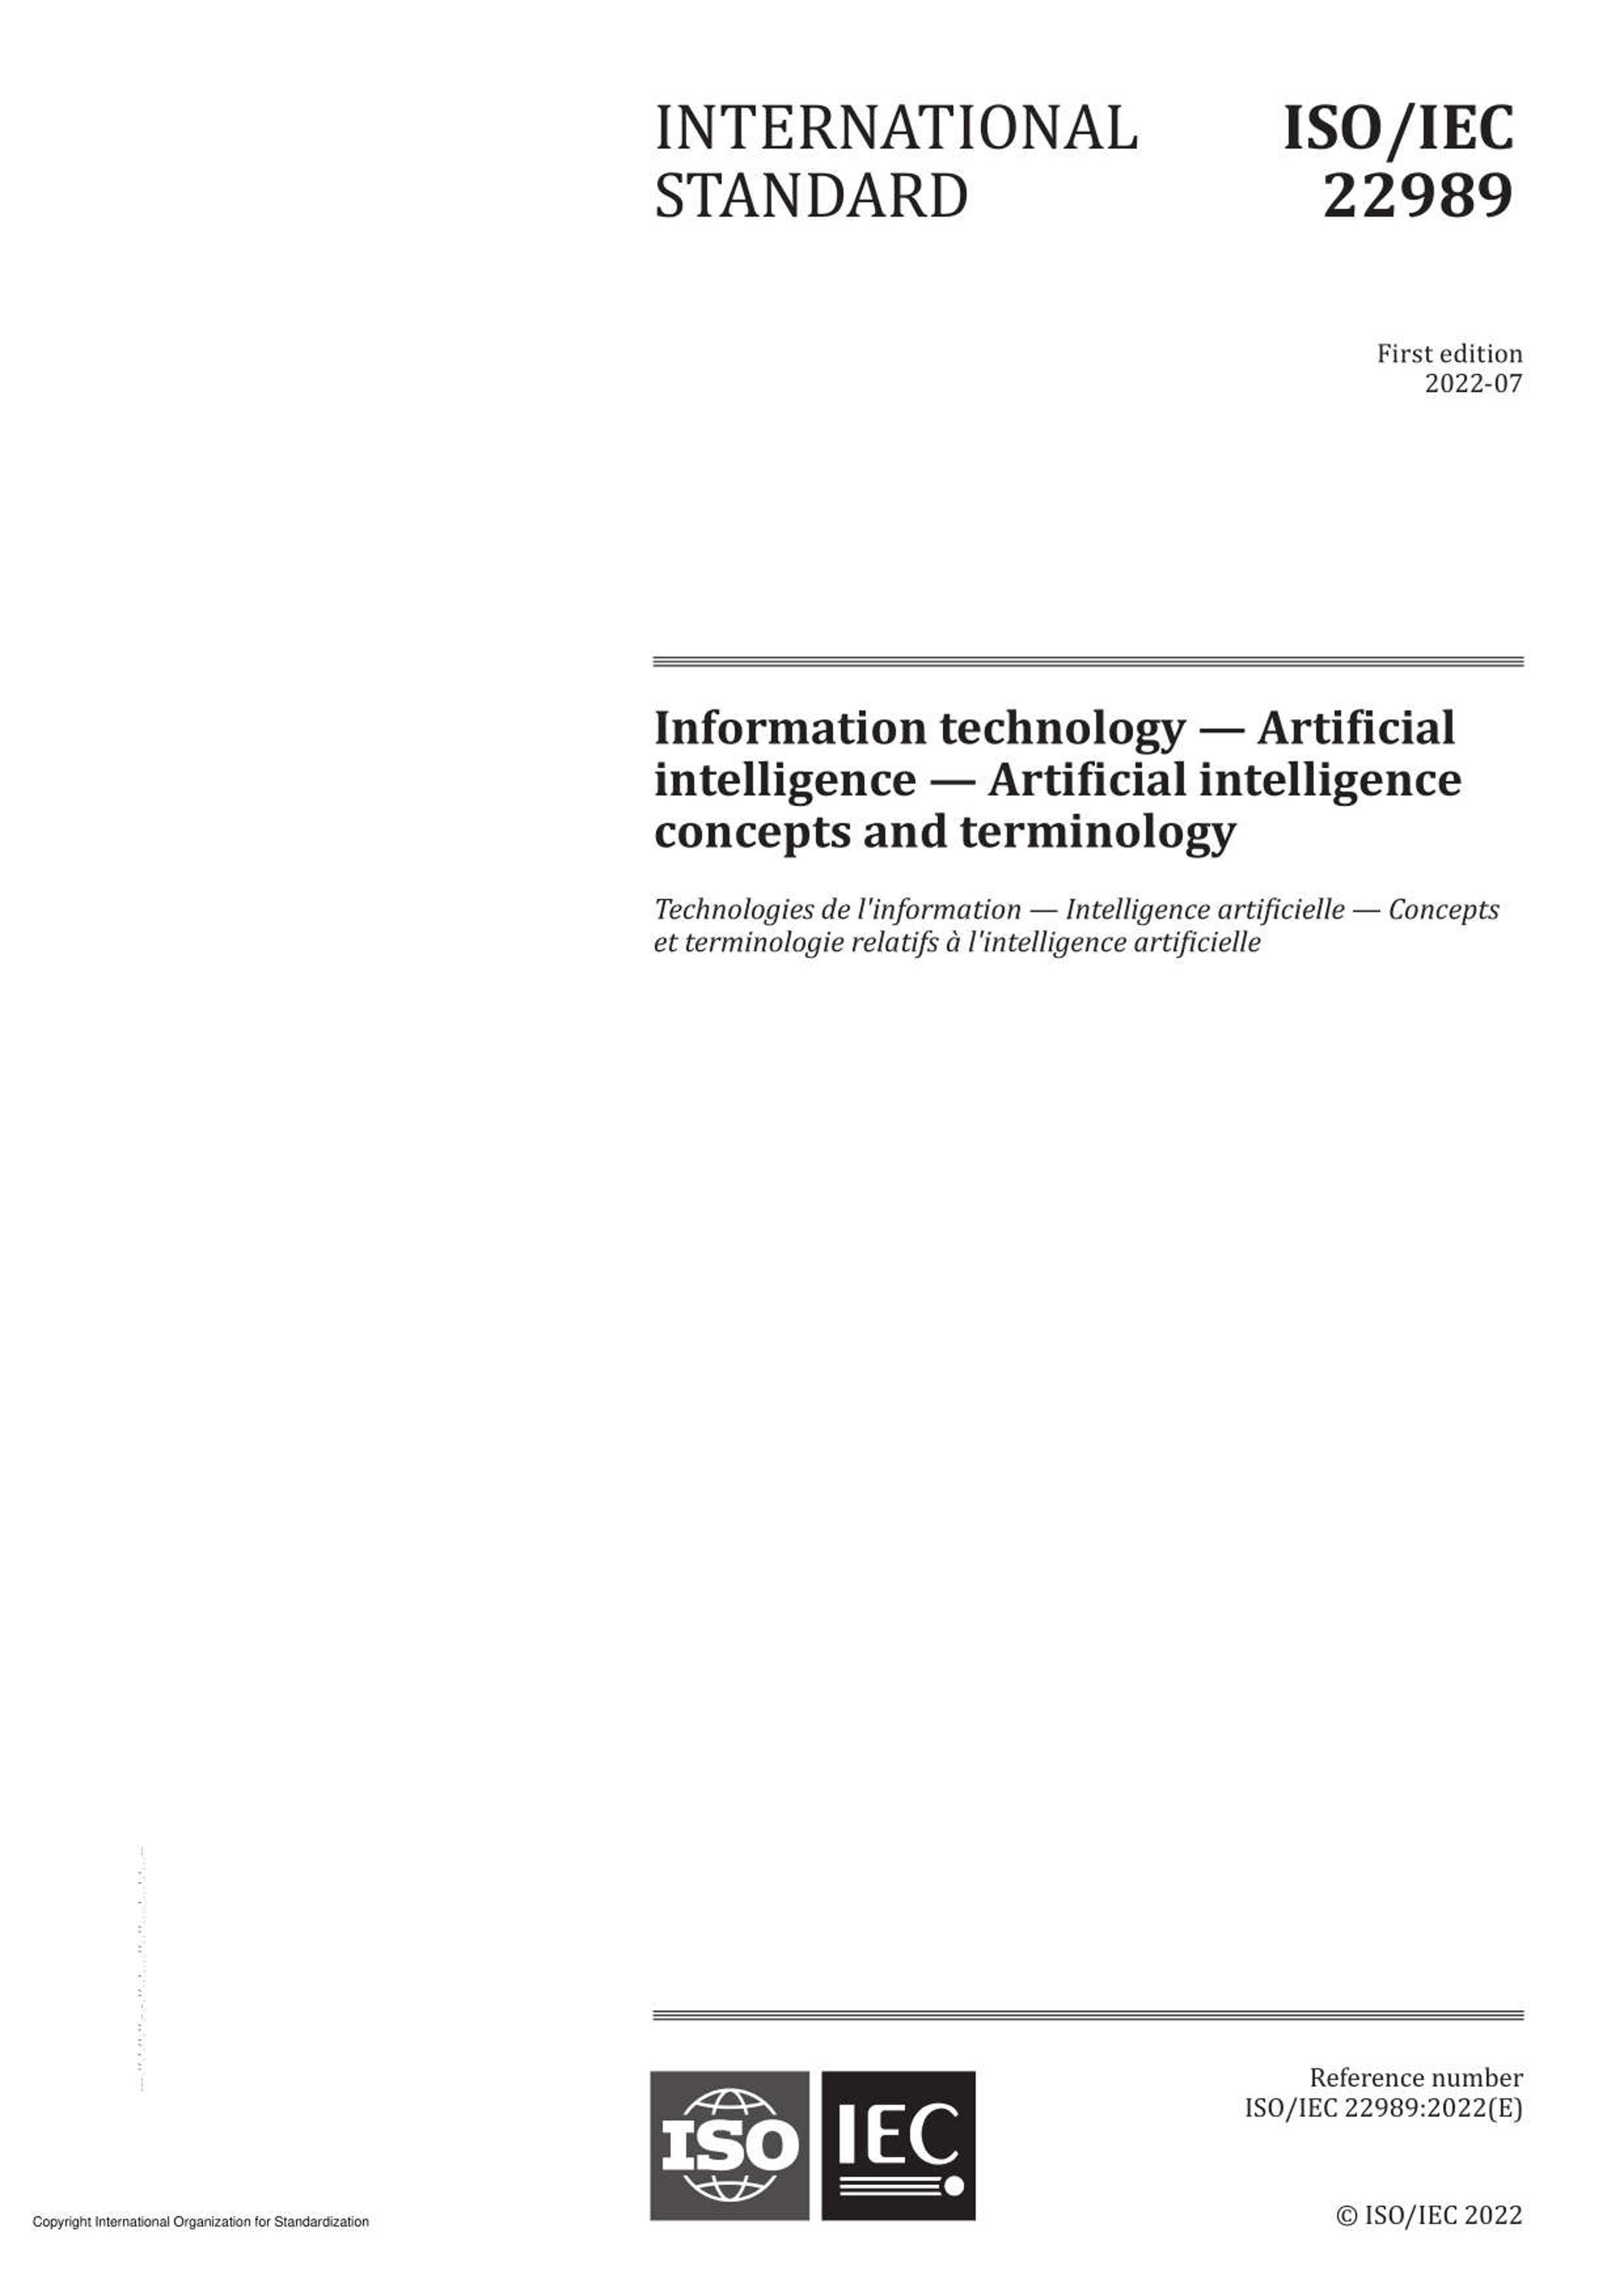 ISOMIEC 22989-2022 Information technology  Artificial intelligence  Artificial intelligence concepts and terminology.pdf1ҳ